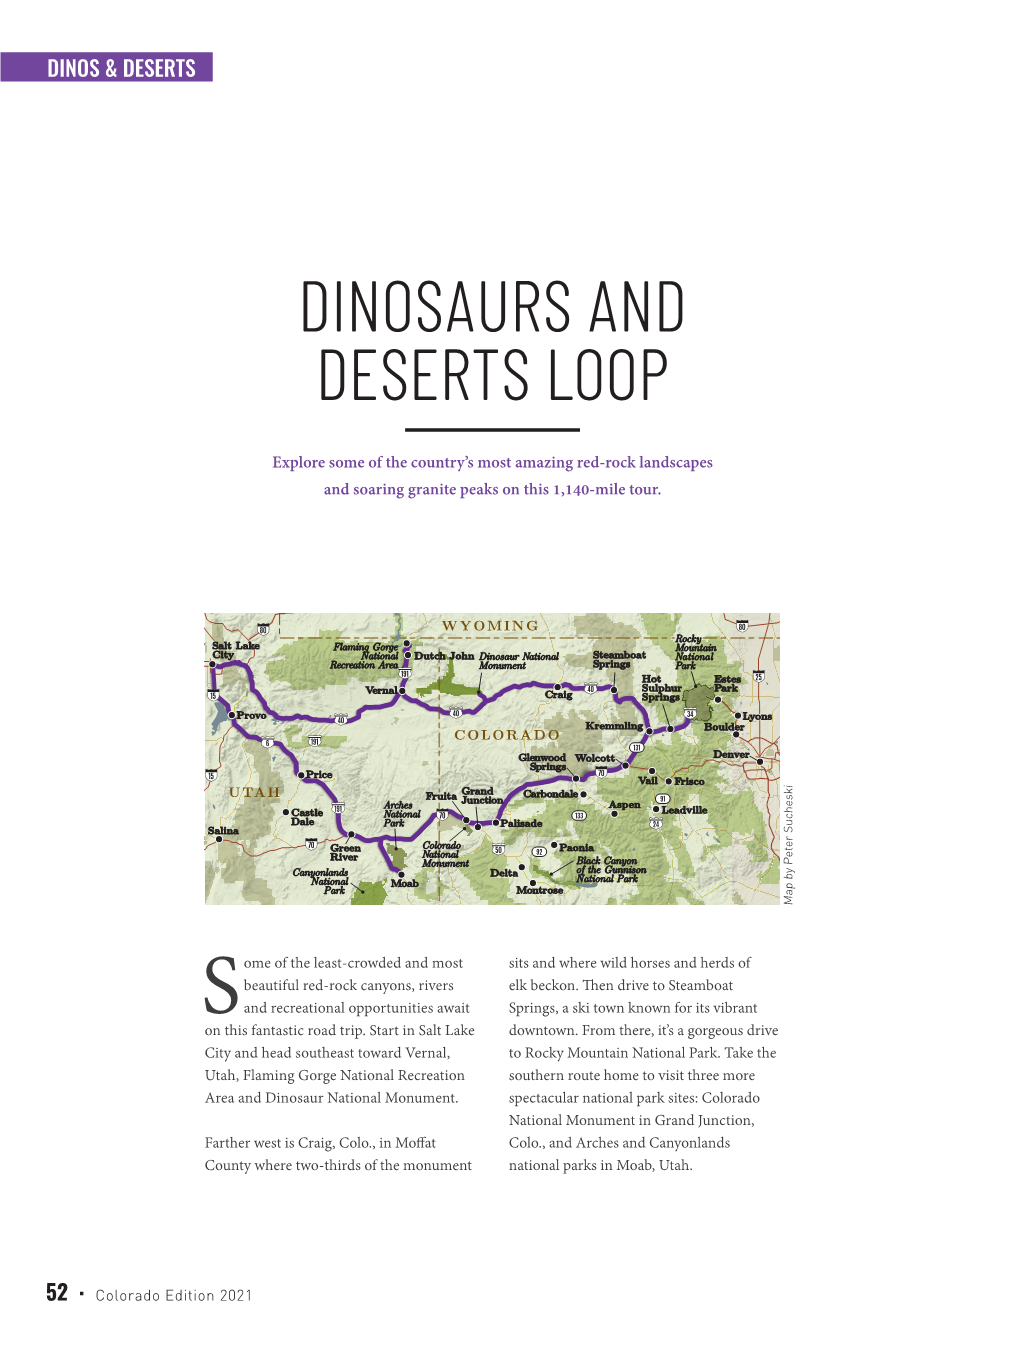 Dinosaurs and Deserts Loop